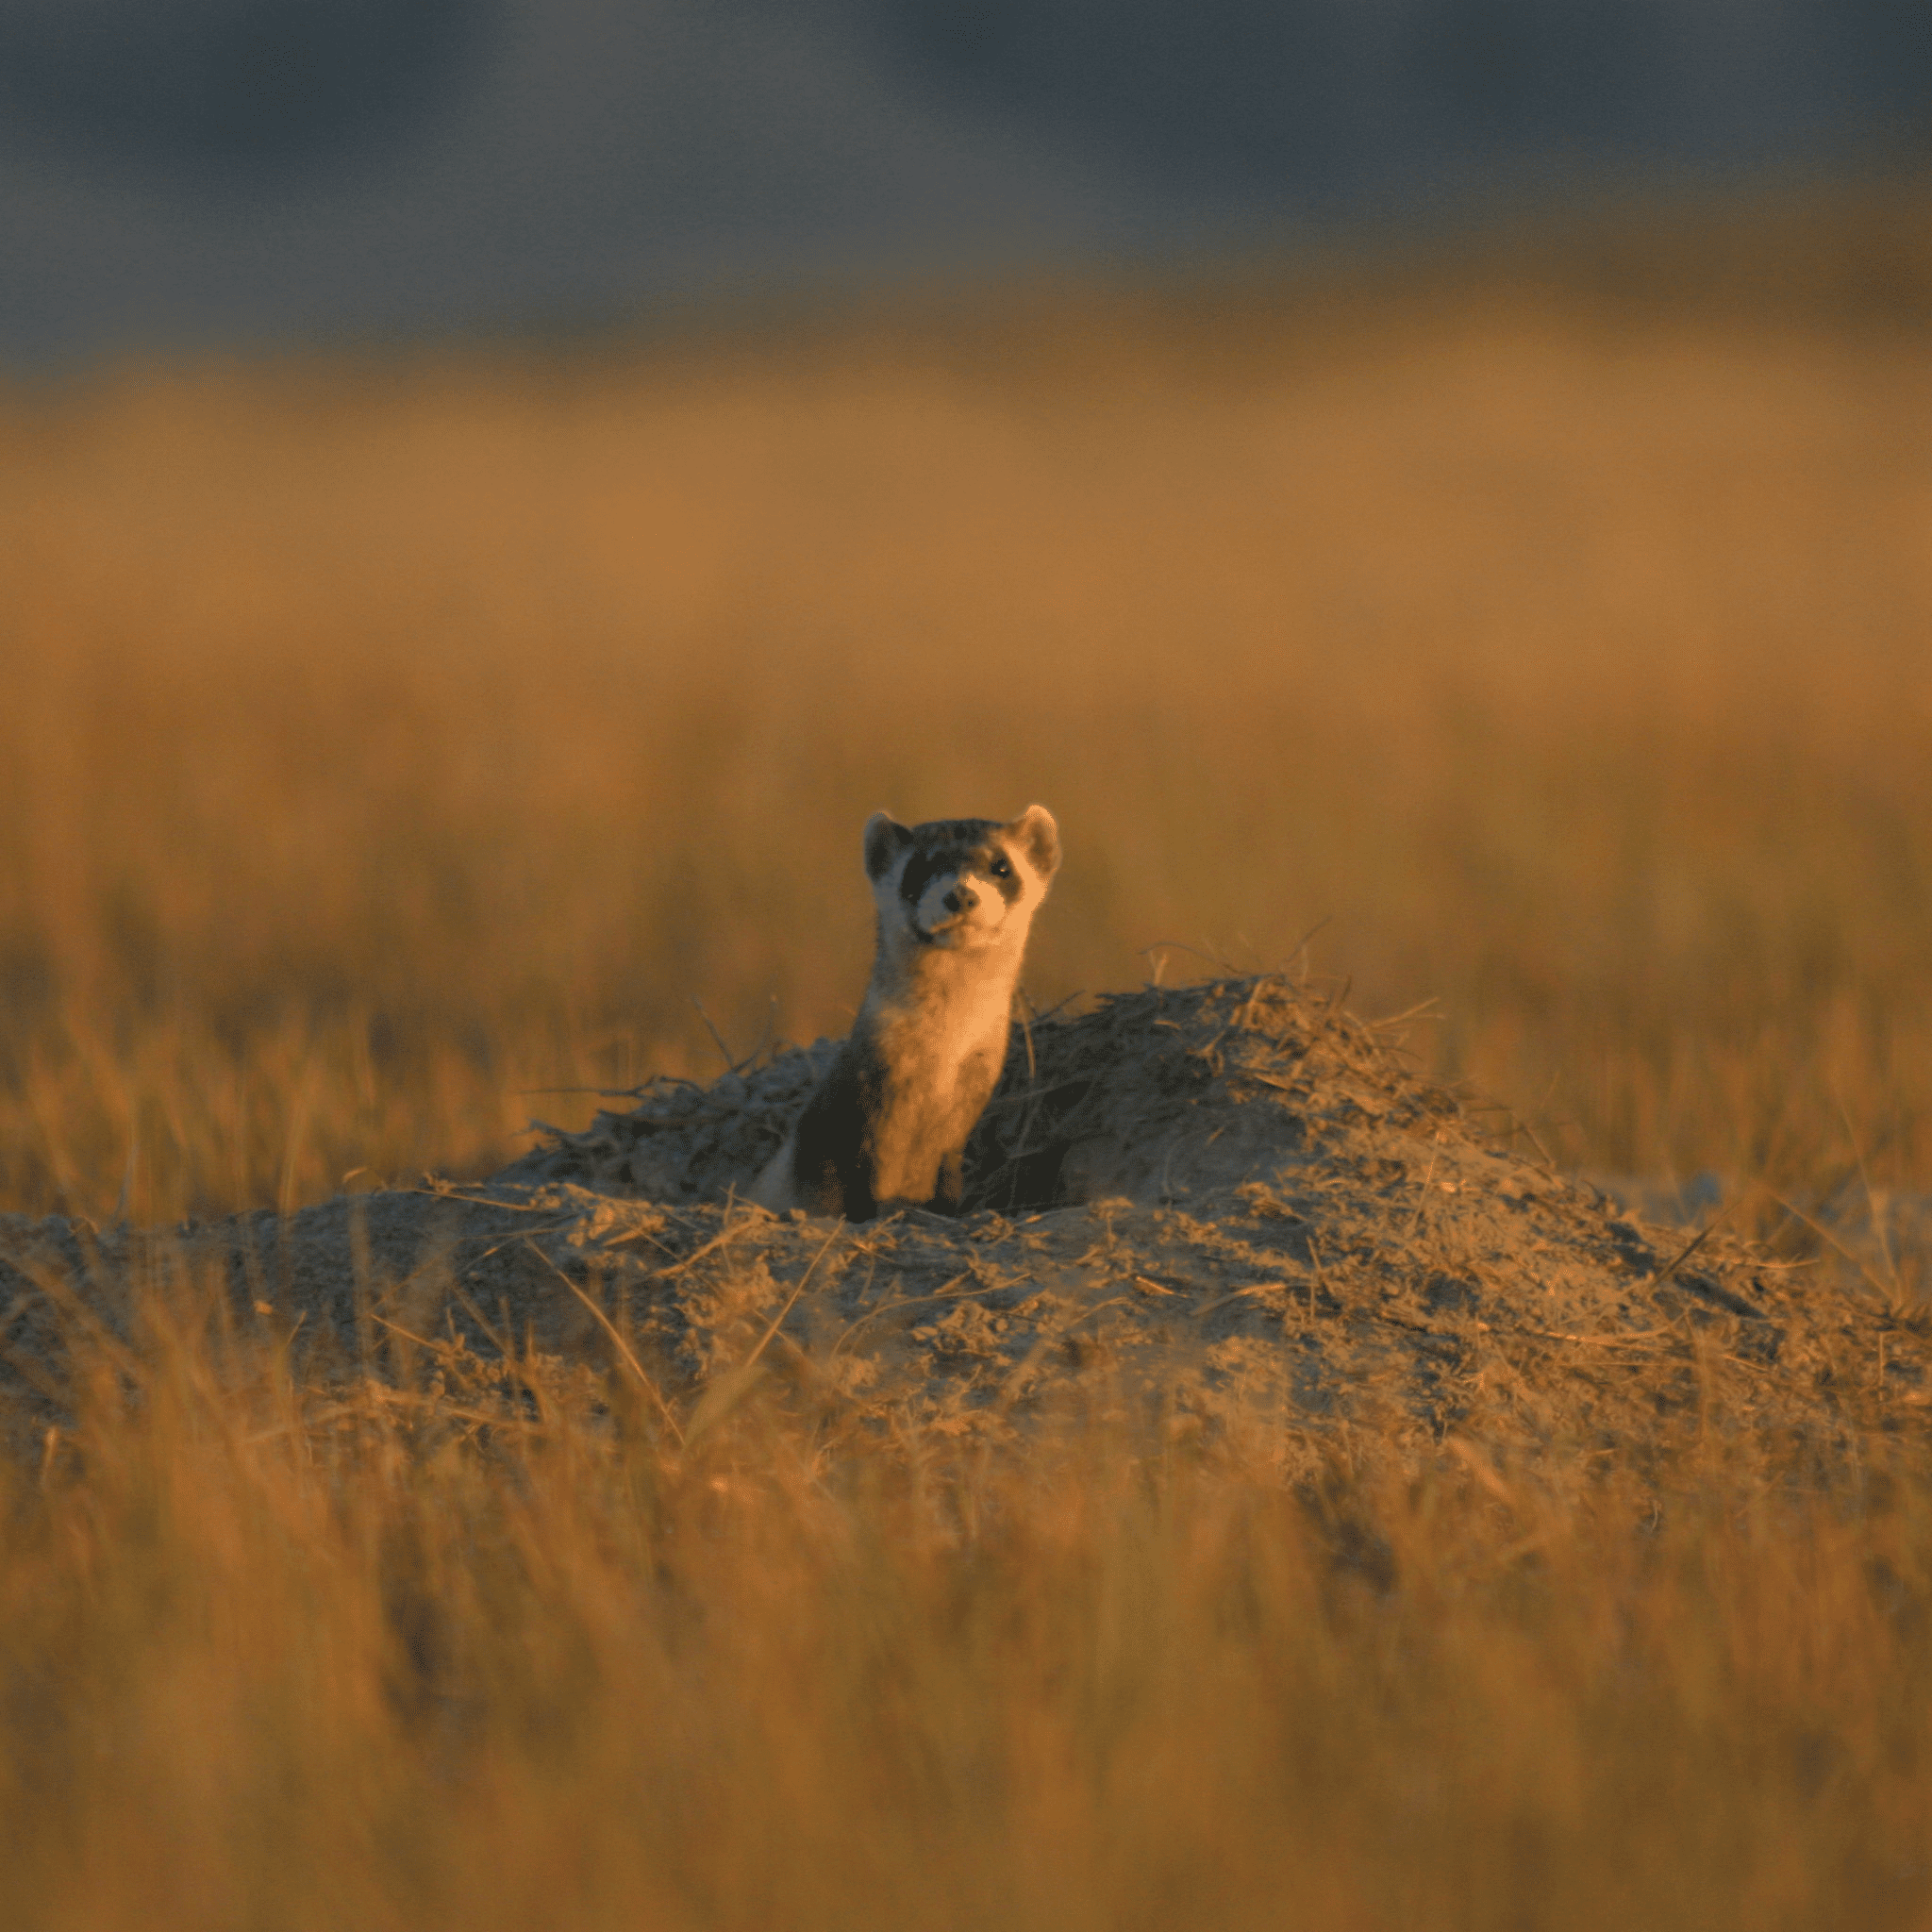 Black-footed-ferret-in-hole